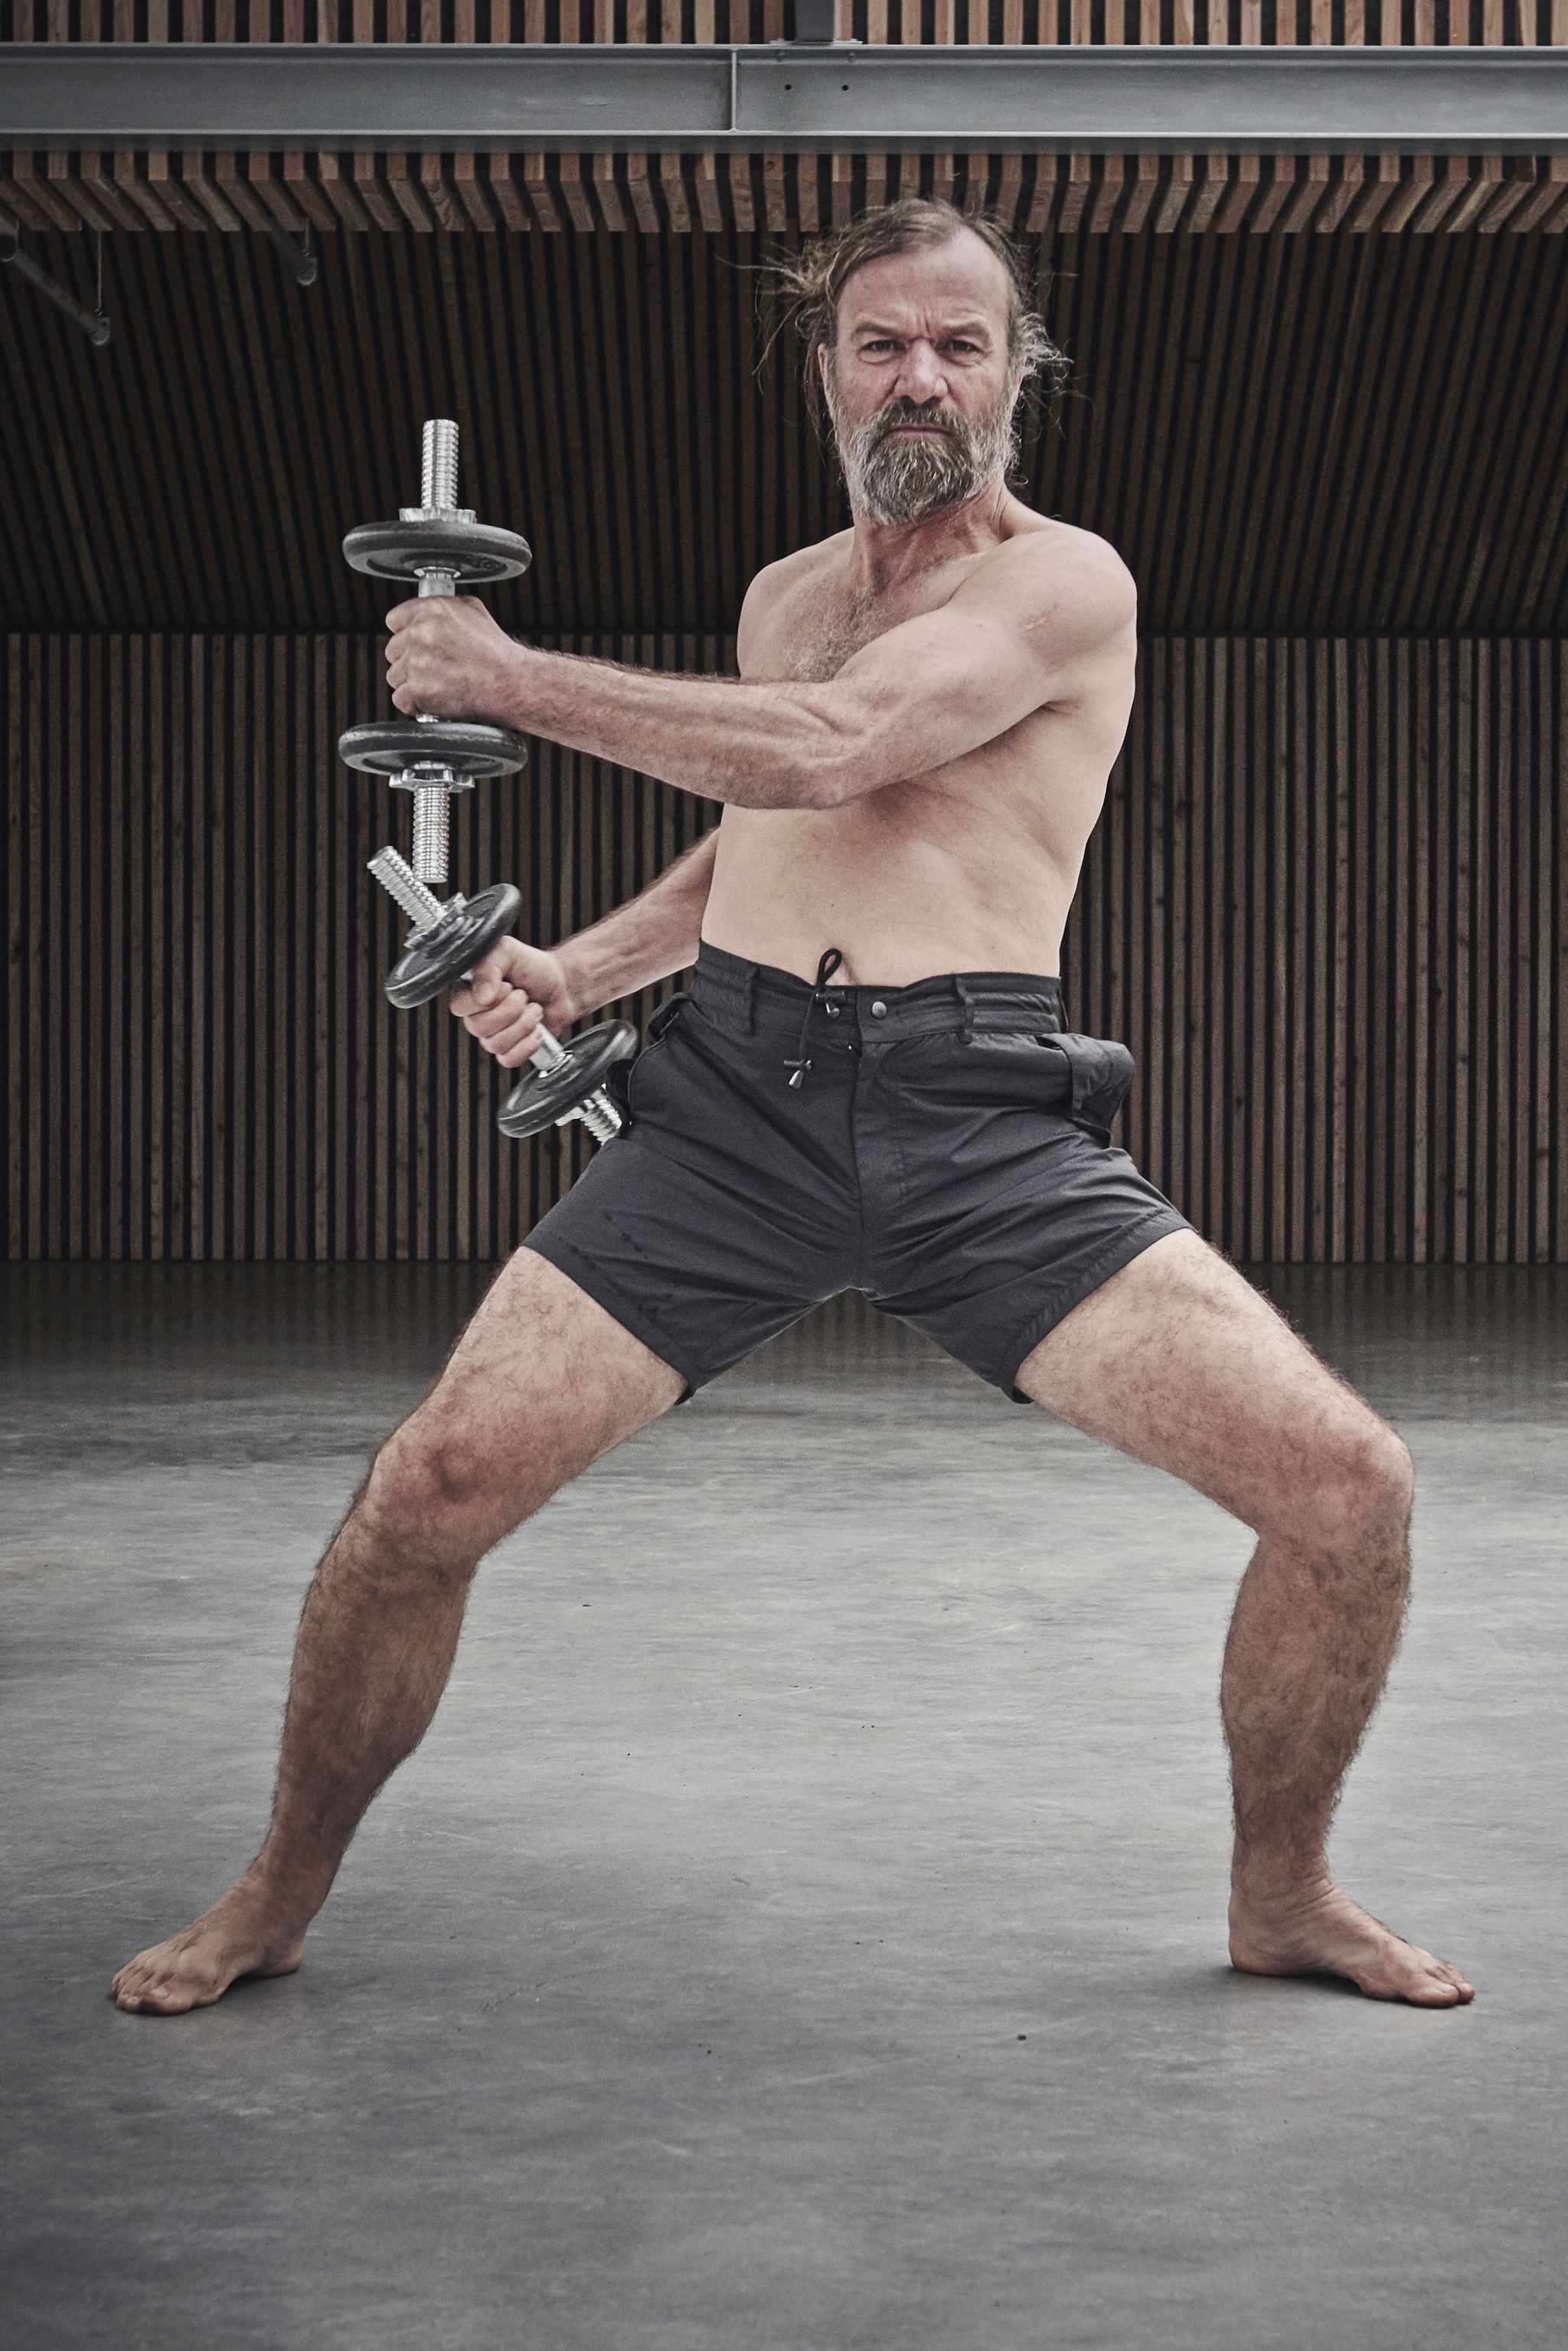 topless male middle aged bearded man standing barefoot holding a dumbell in each hand